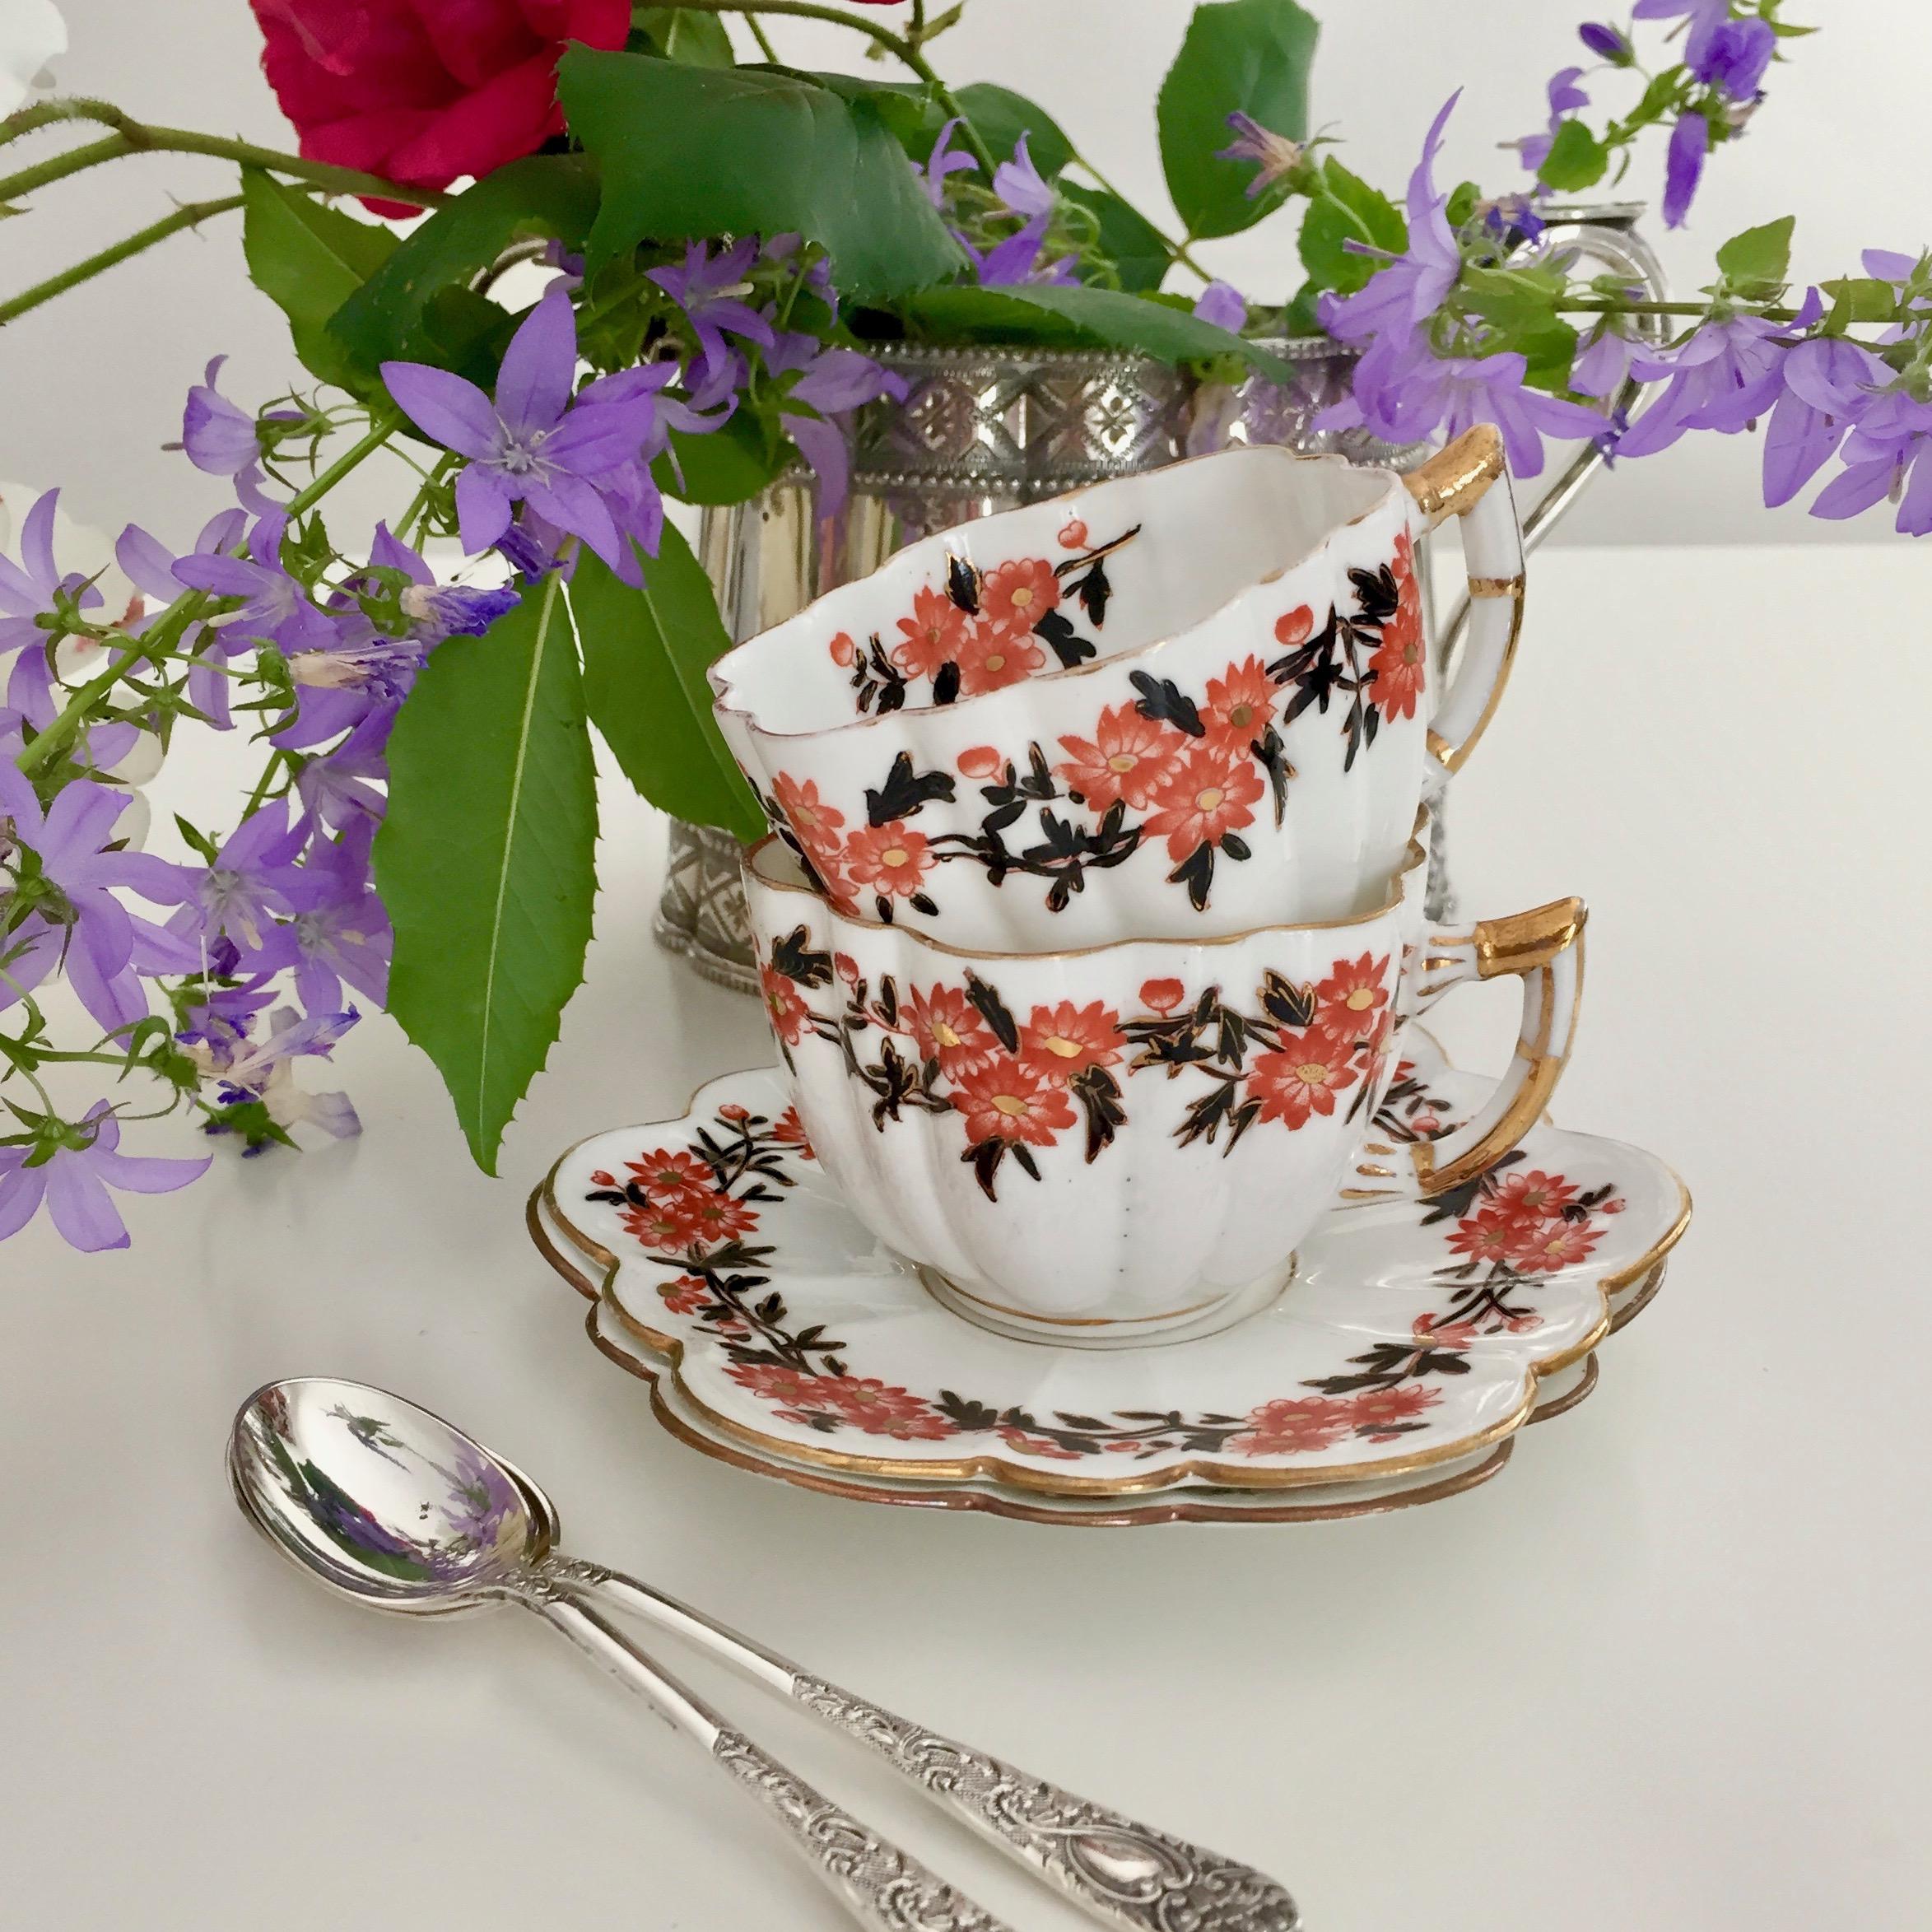 This is a Wileman Daisy shape demitasse cup and saucer with the very endearing 